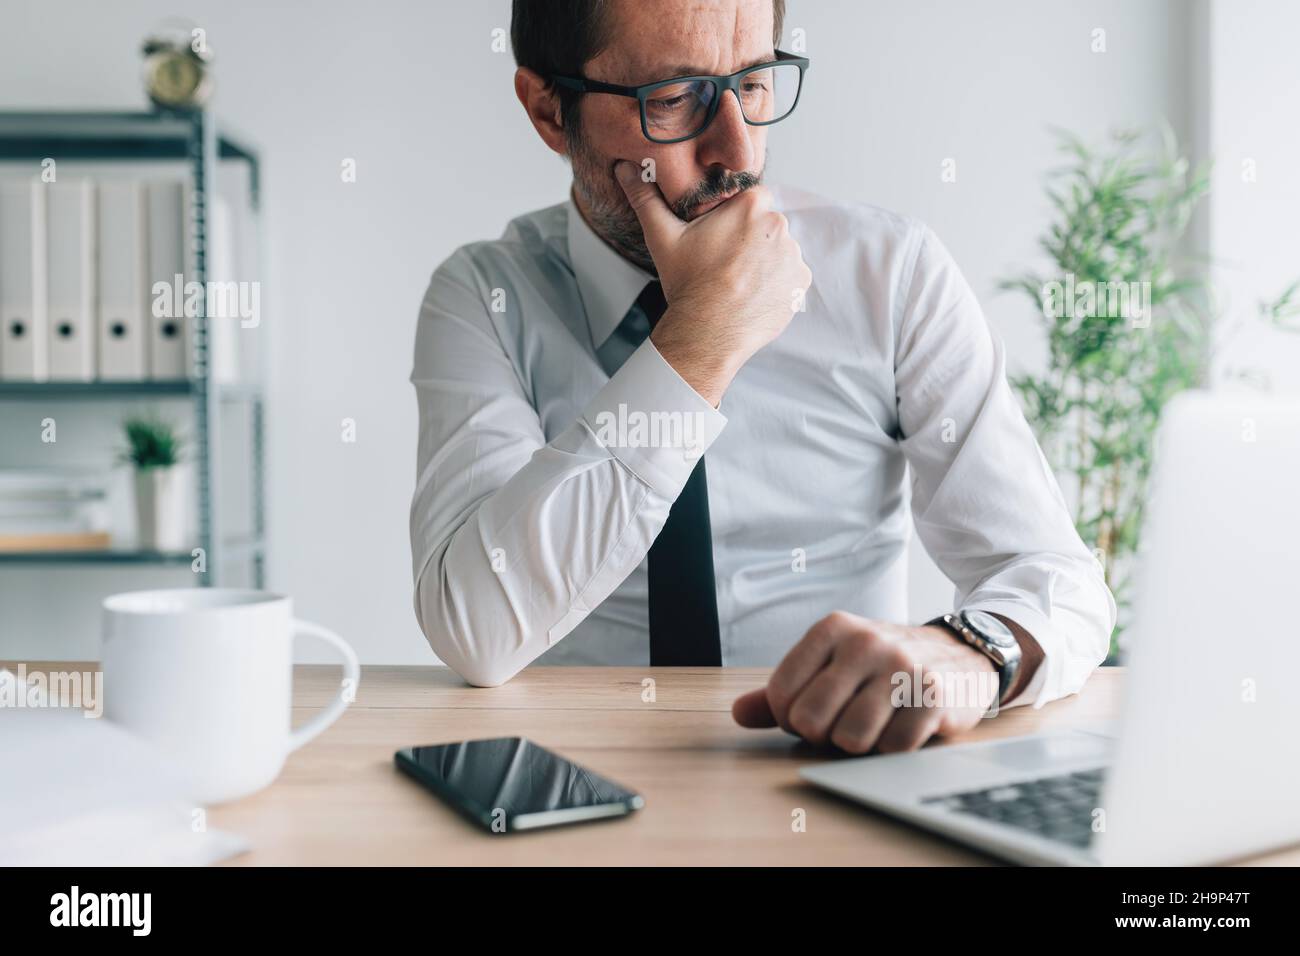 Contemplative caucasian businessman looking at laptop computer screen in business office with perplexed facial expression, portrait of thoughtful entr Stock Photo